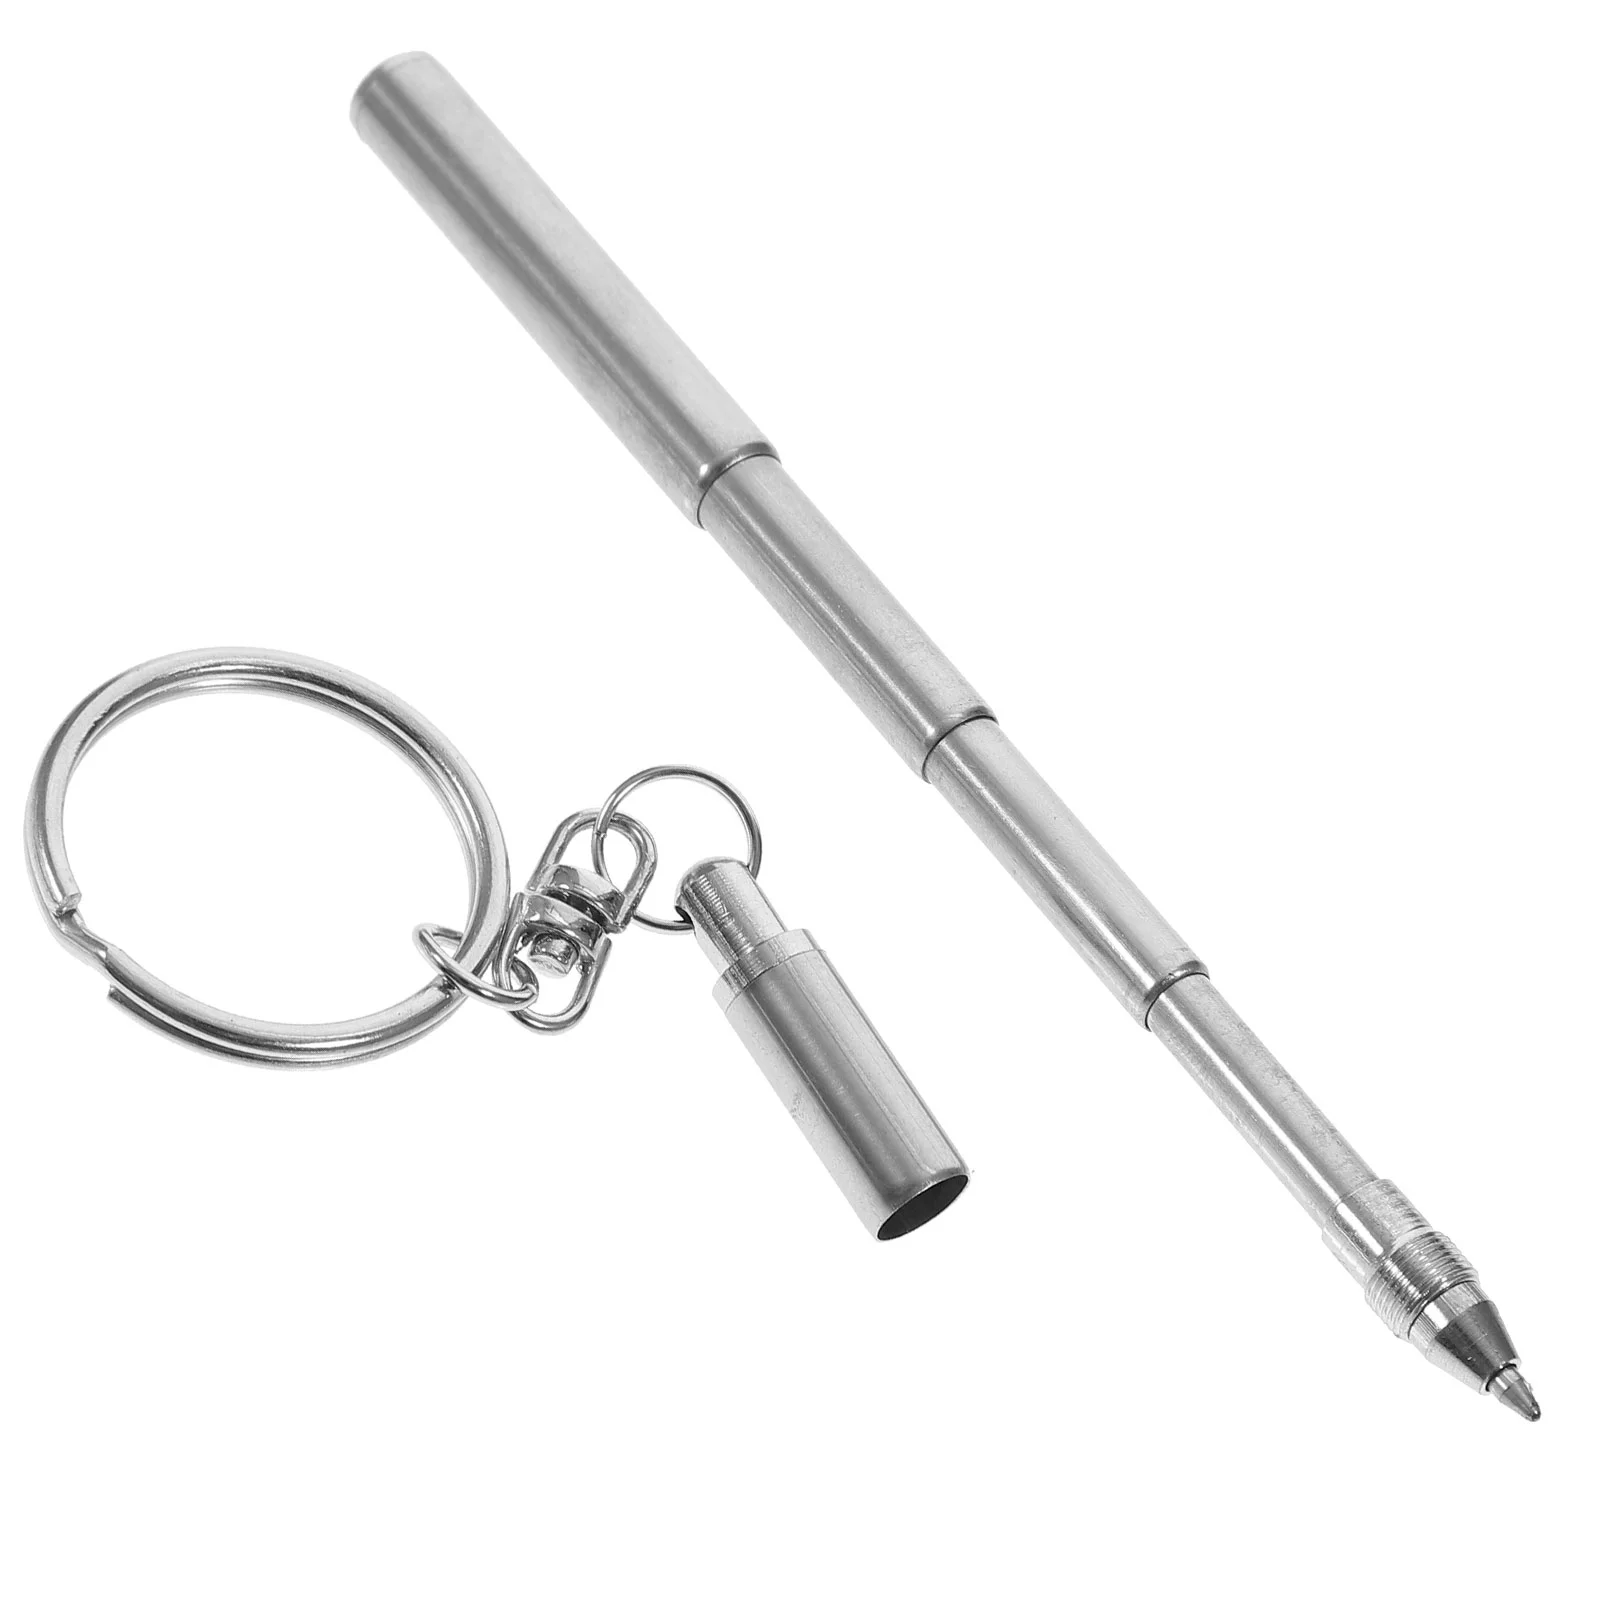 Retractable Pen Shape Keychain Mini Metal Key Ring Portable Stainless Steel Telescopic Ball Point Pens Black Keychain Tools jewelry casket cosmetic storage box makeup packing organizer multi function earrings ring container case portable leather travel